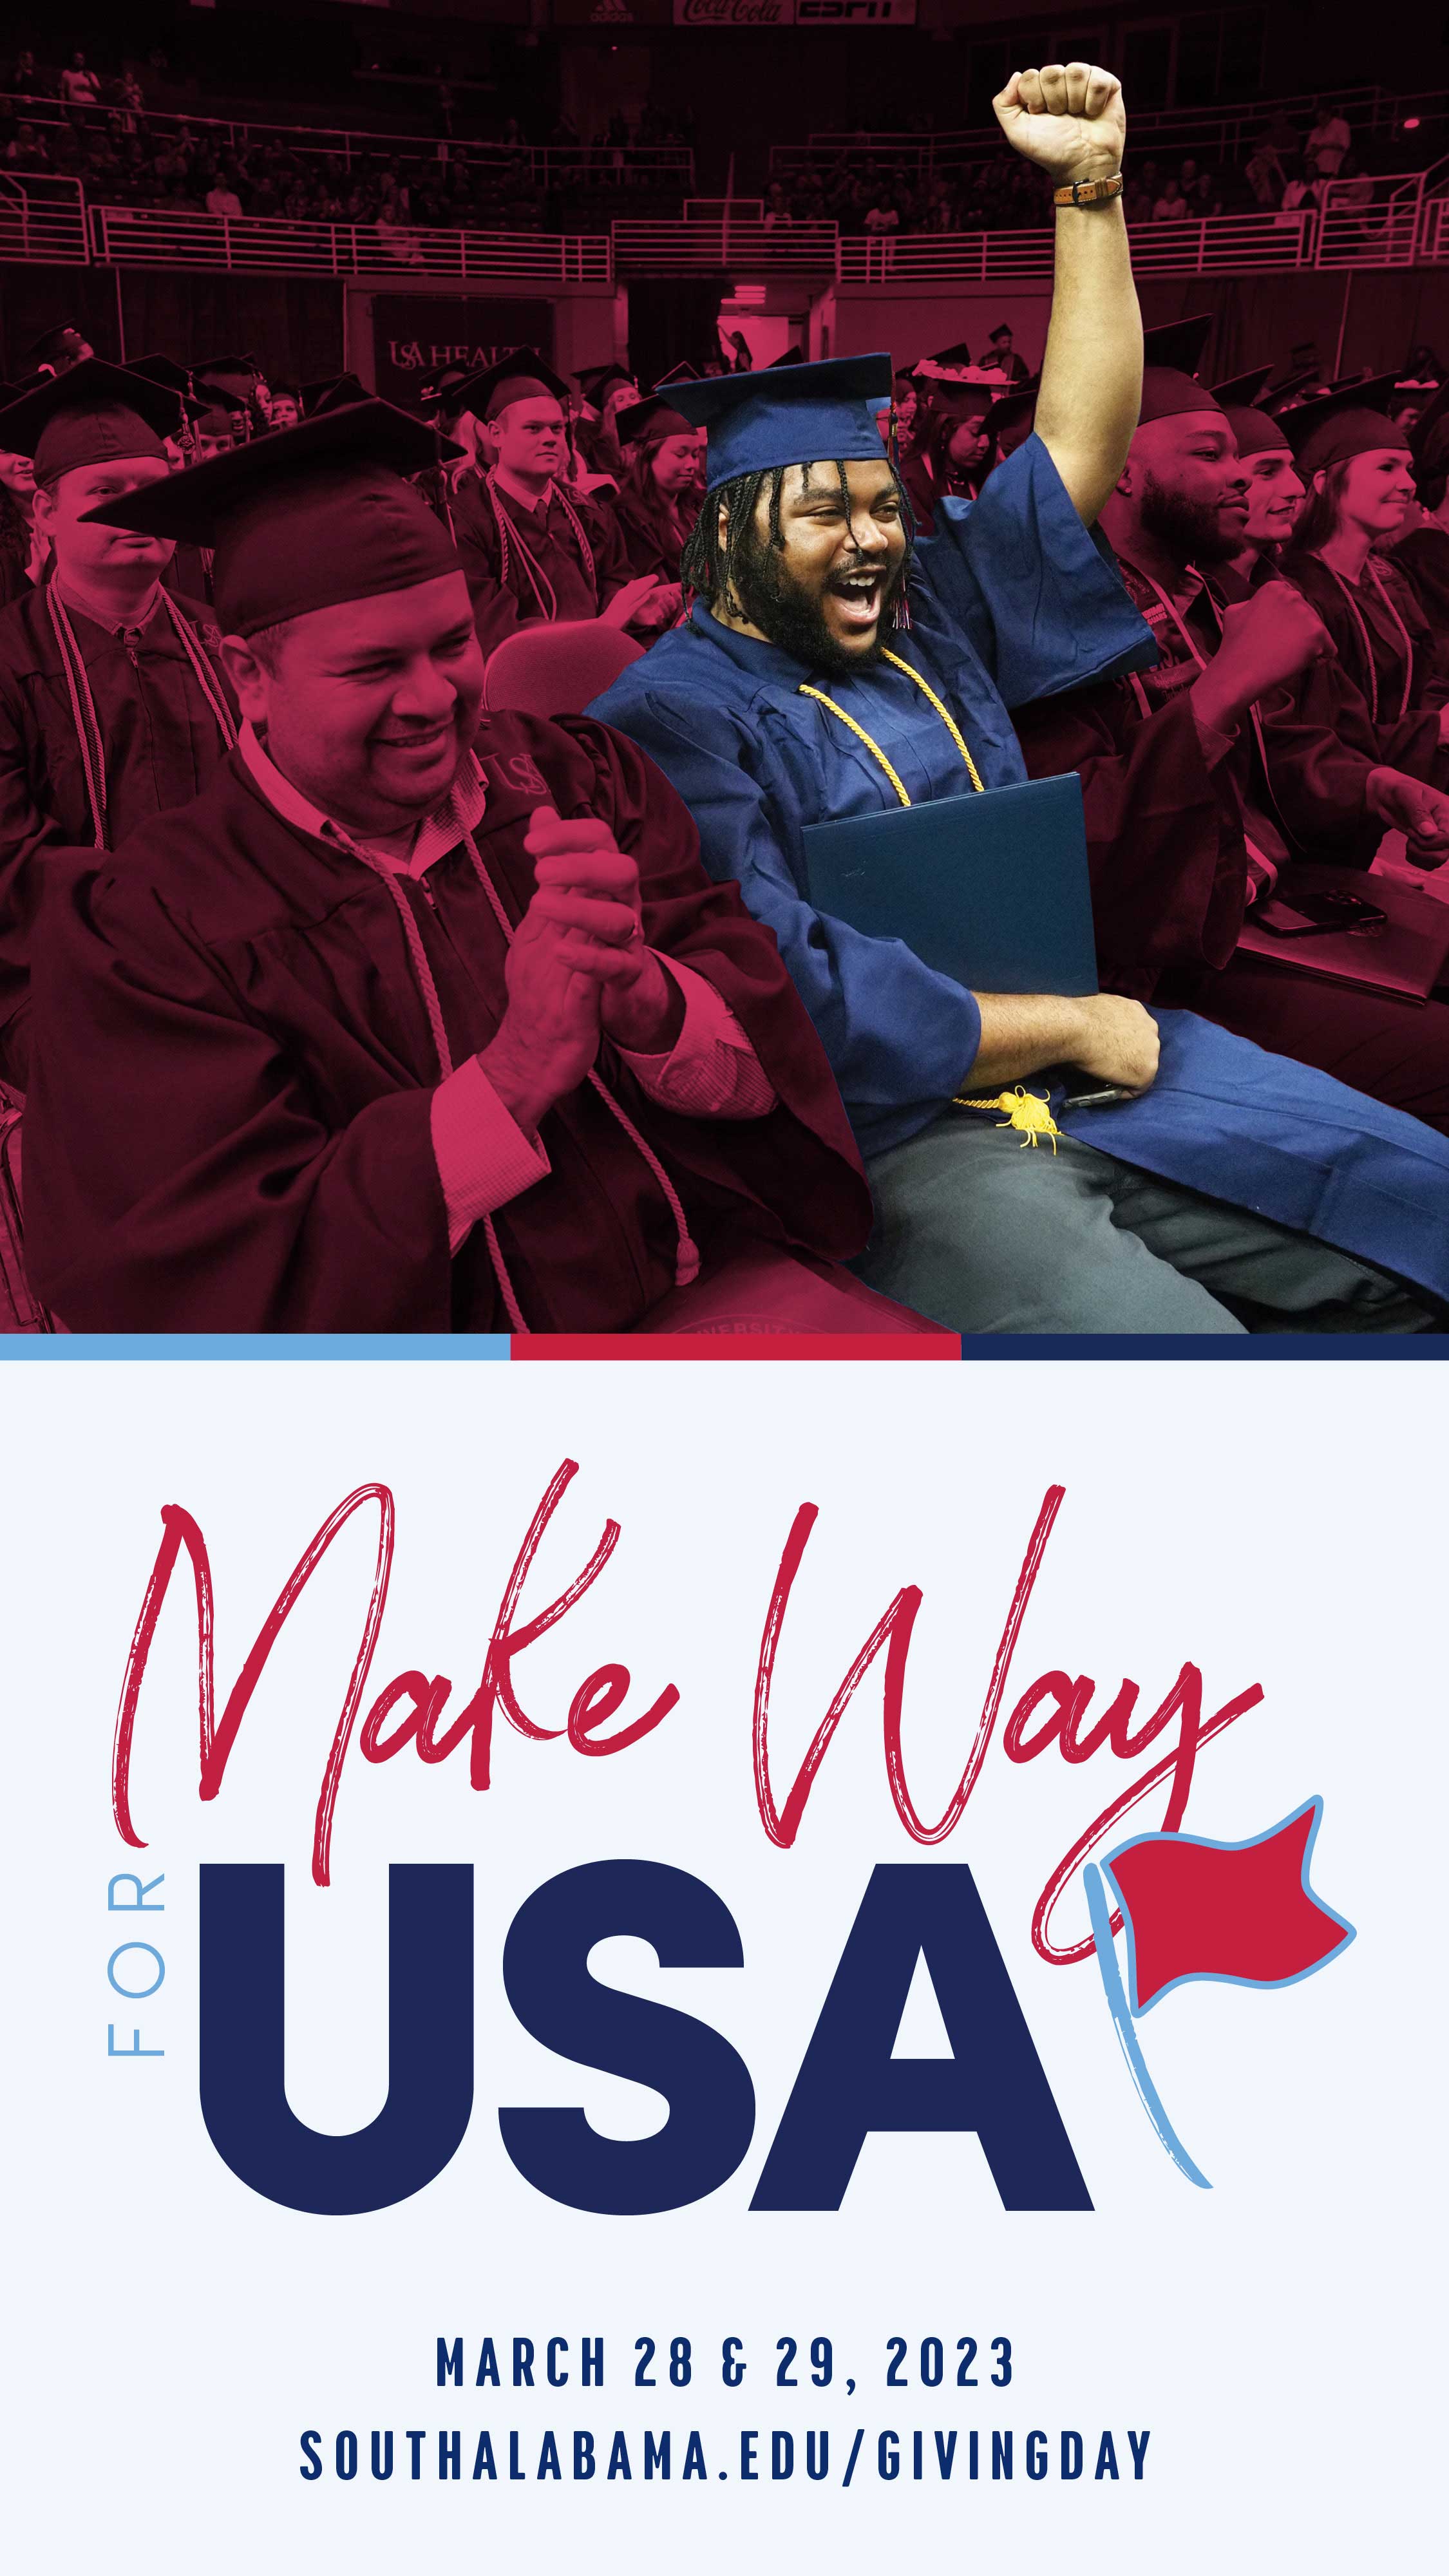 Facebook or Instagram Make Way for USA March 28 and 29, 2023 Southalabama.edu/givingday with image of graduates in cap and gowns cheering.